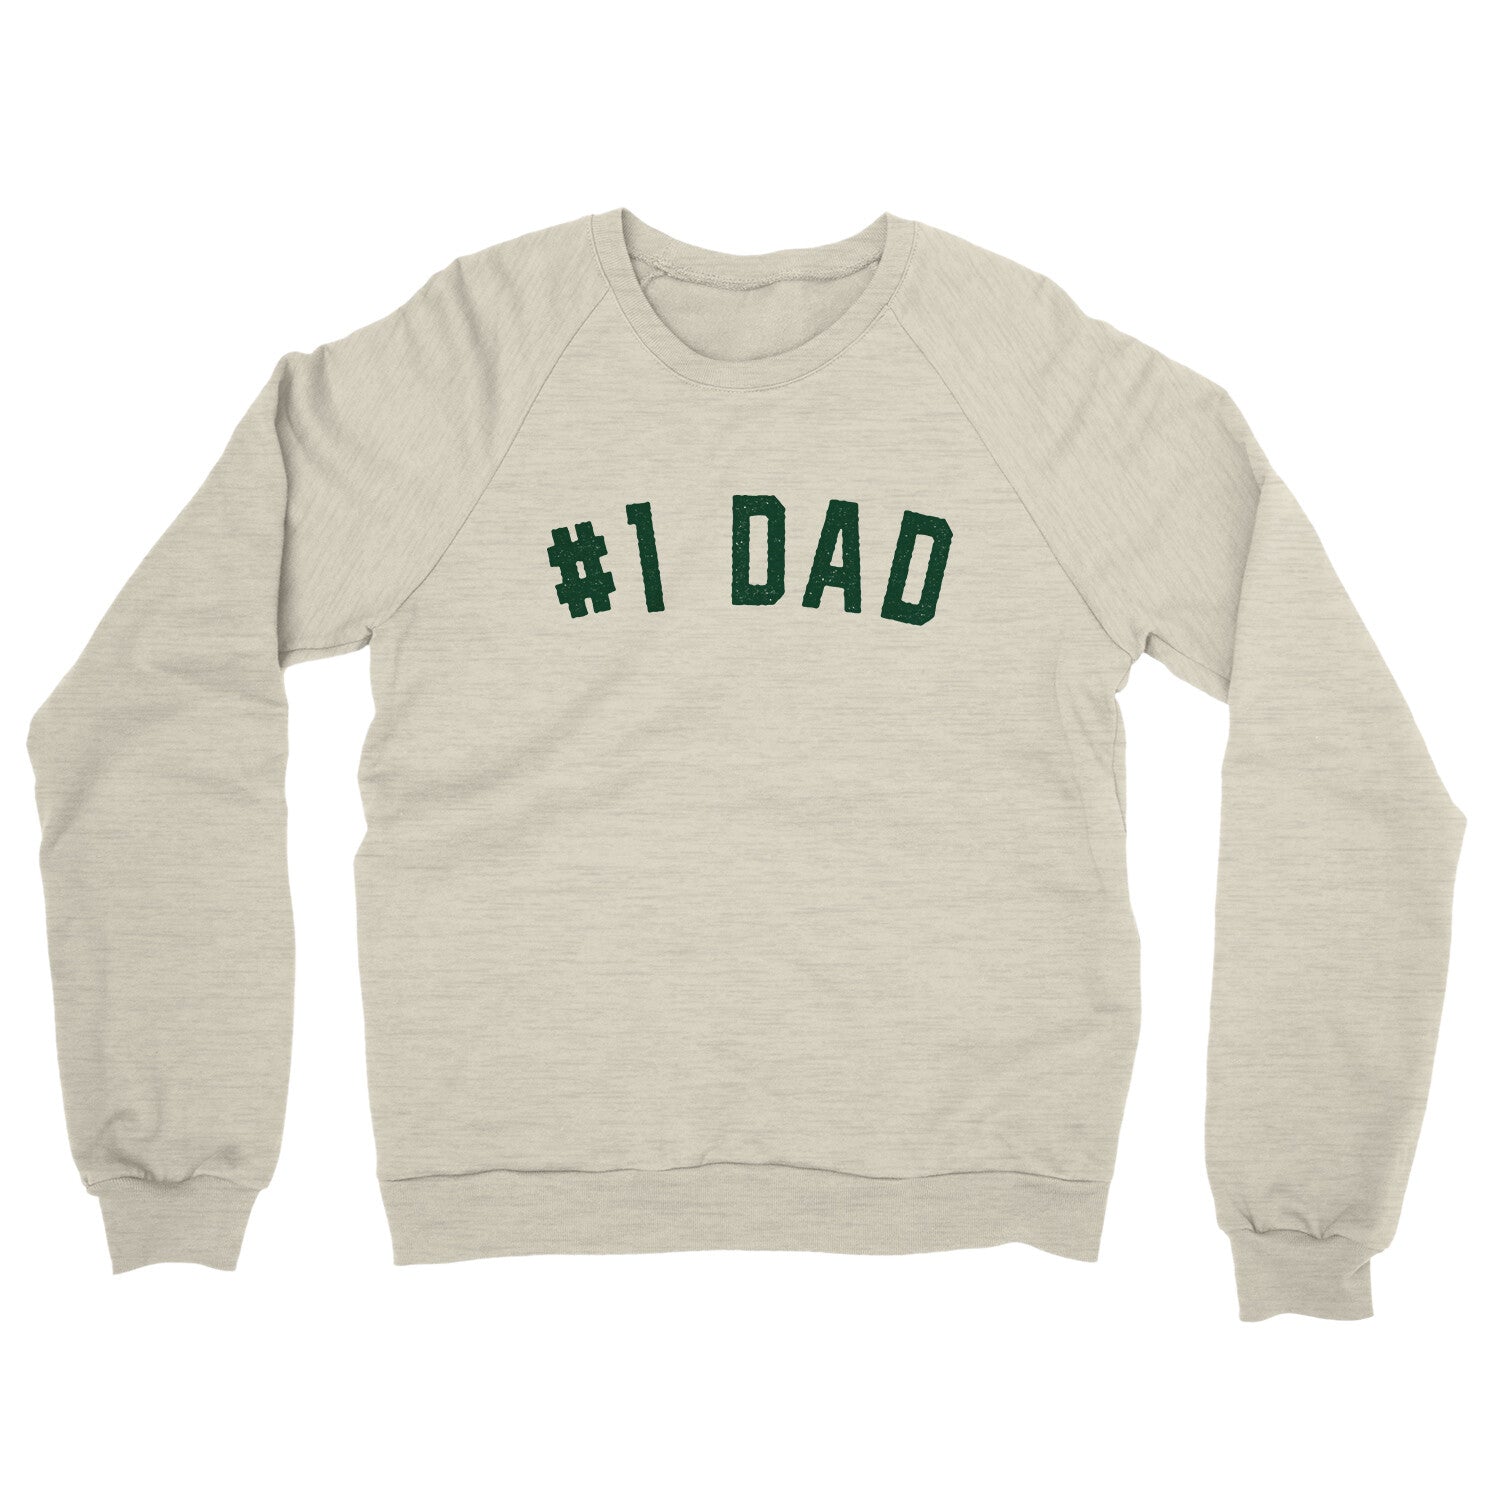 Number 1 Dad in Heather Oatmeal Color